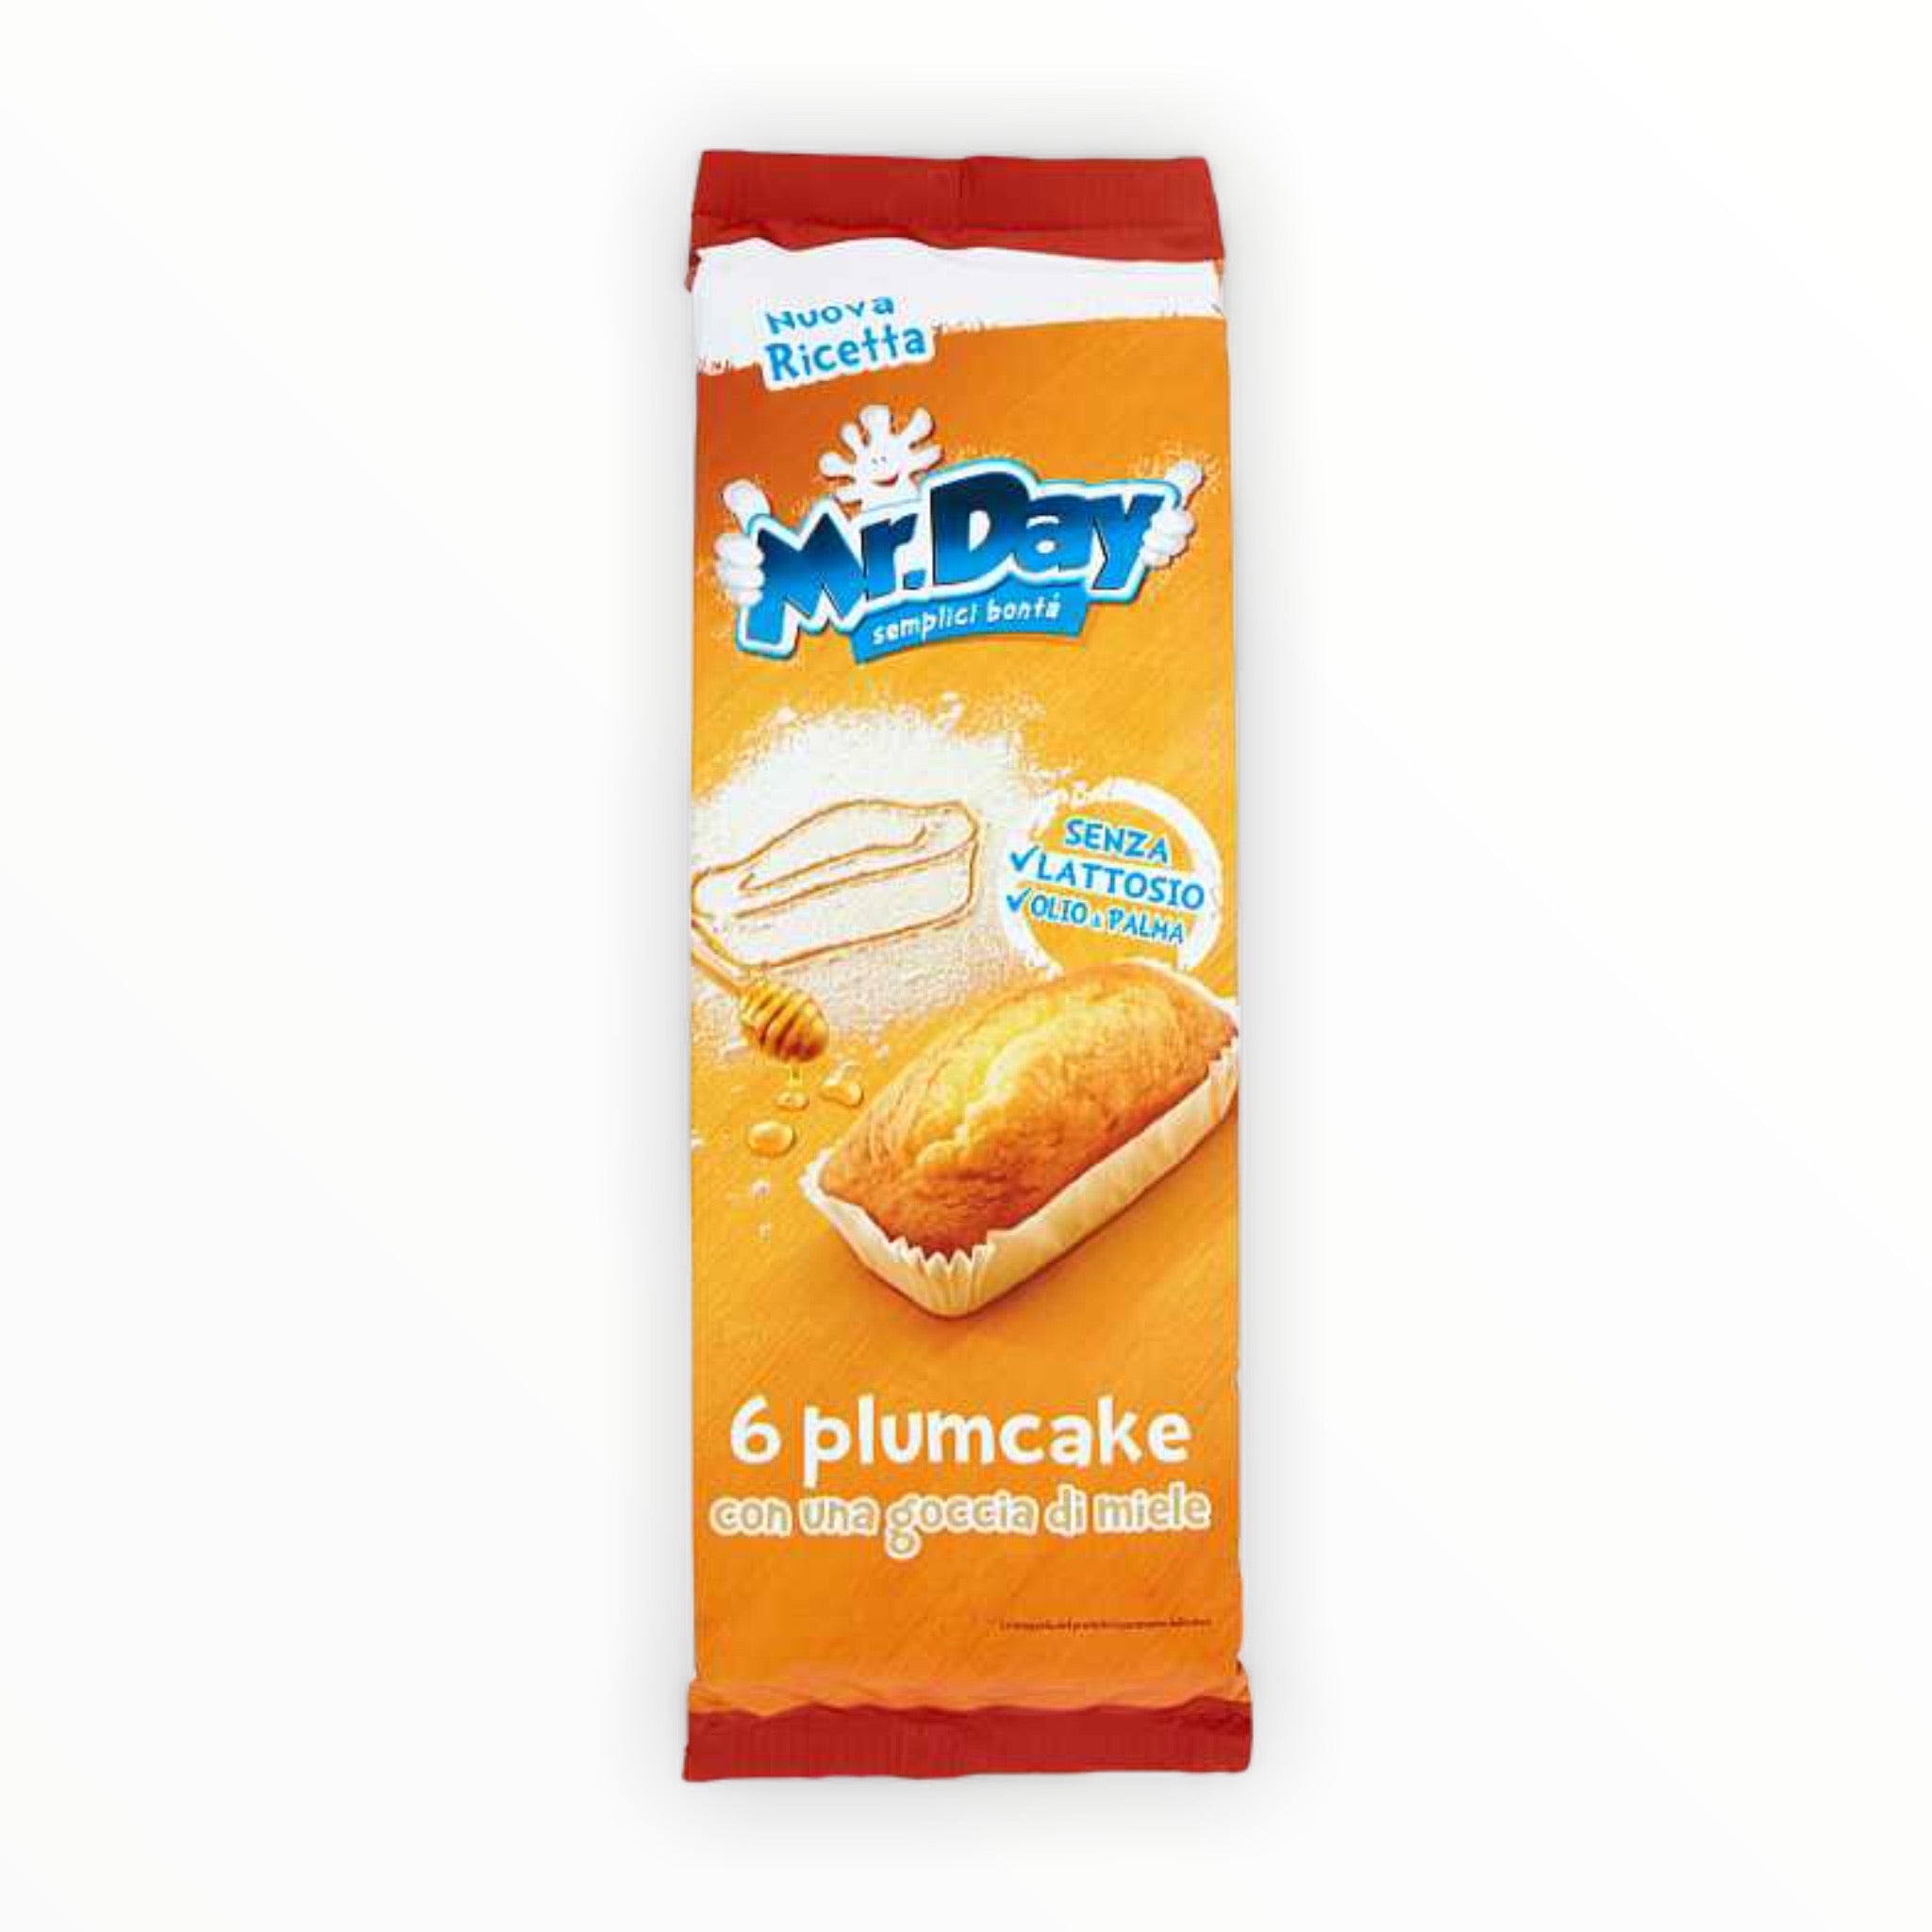 BEST BEFORE APRIL/18/24 Mr. Day Classic Plumcake